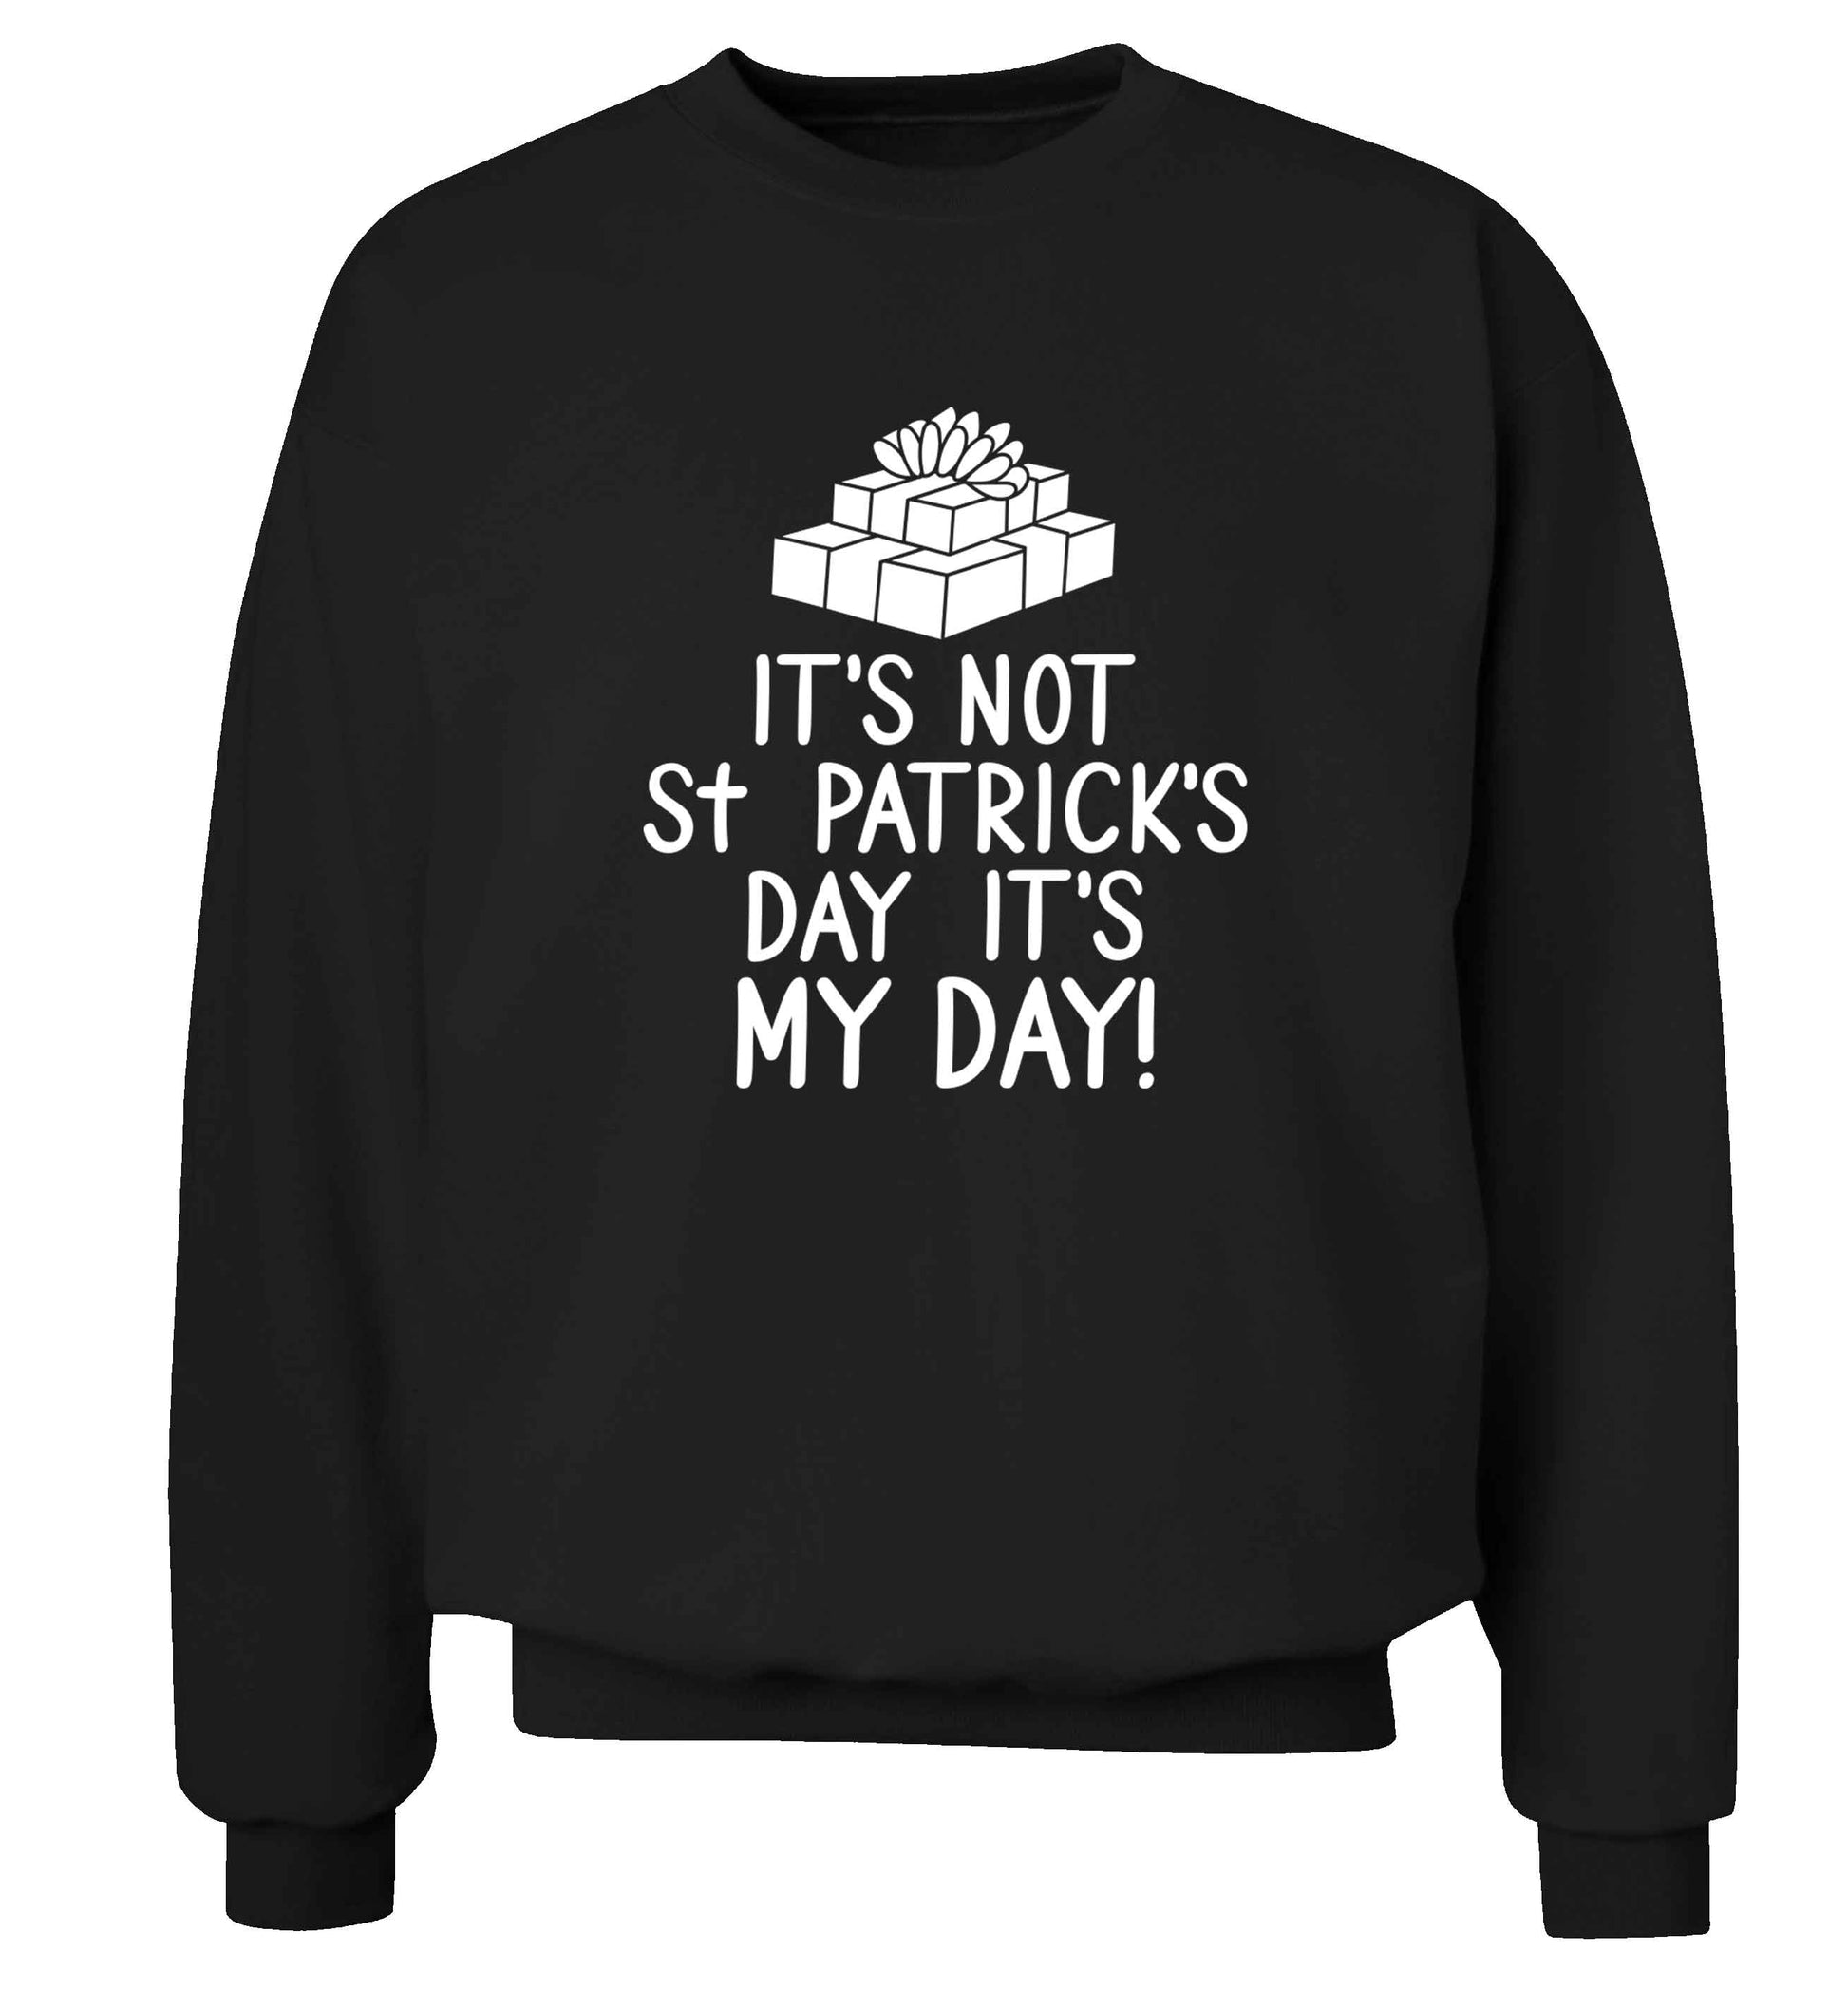 Funny gifts for your mum on mother's dayor her birthday! It's not St Patricks day it's my day adult's unisex black sweater 2XL